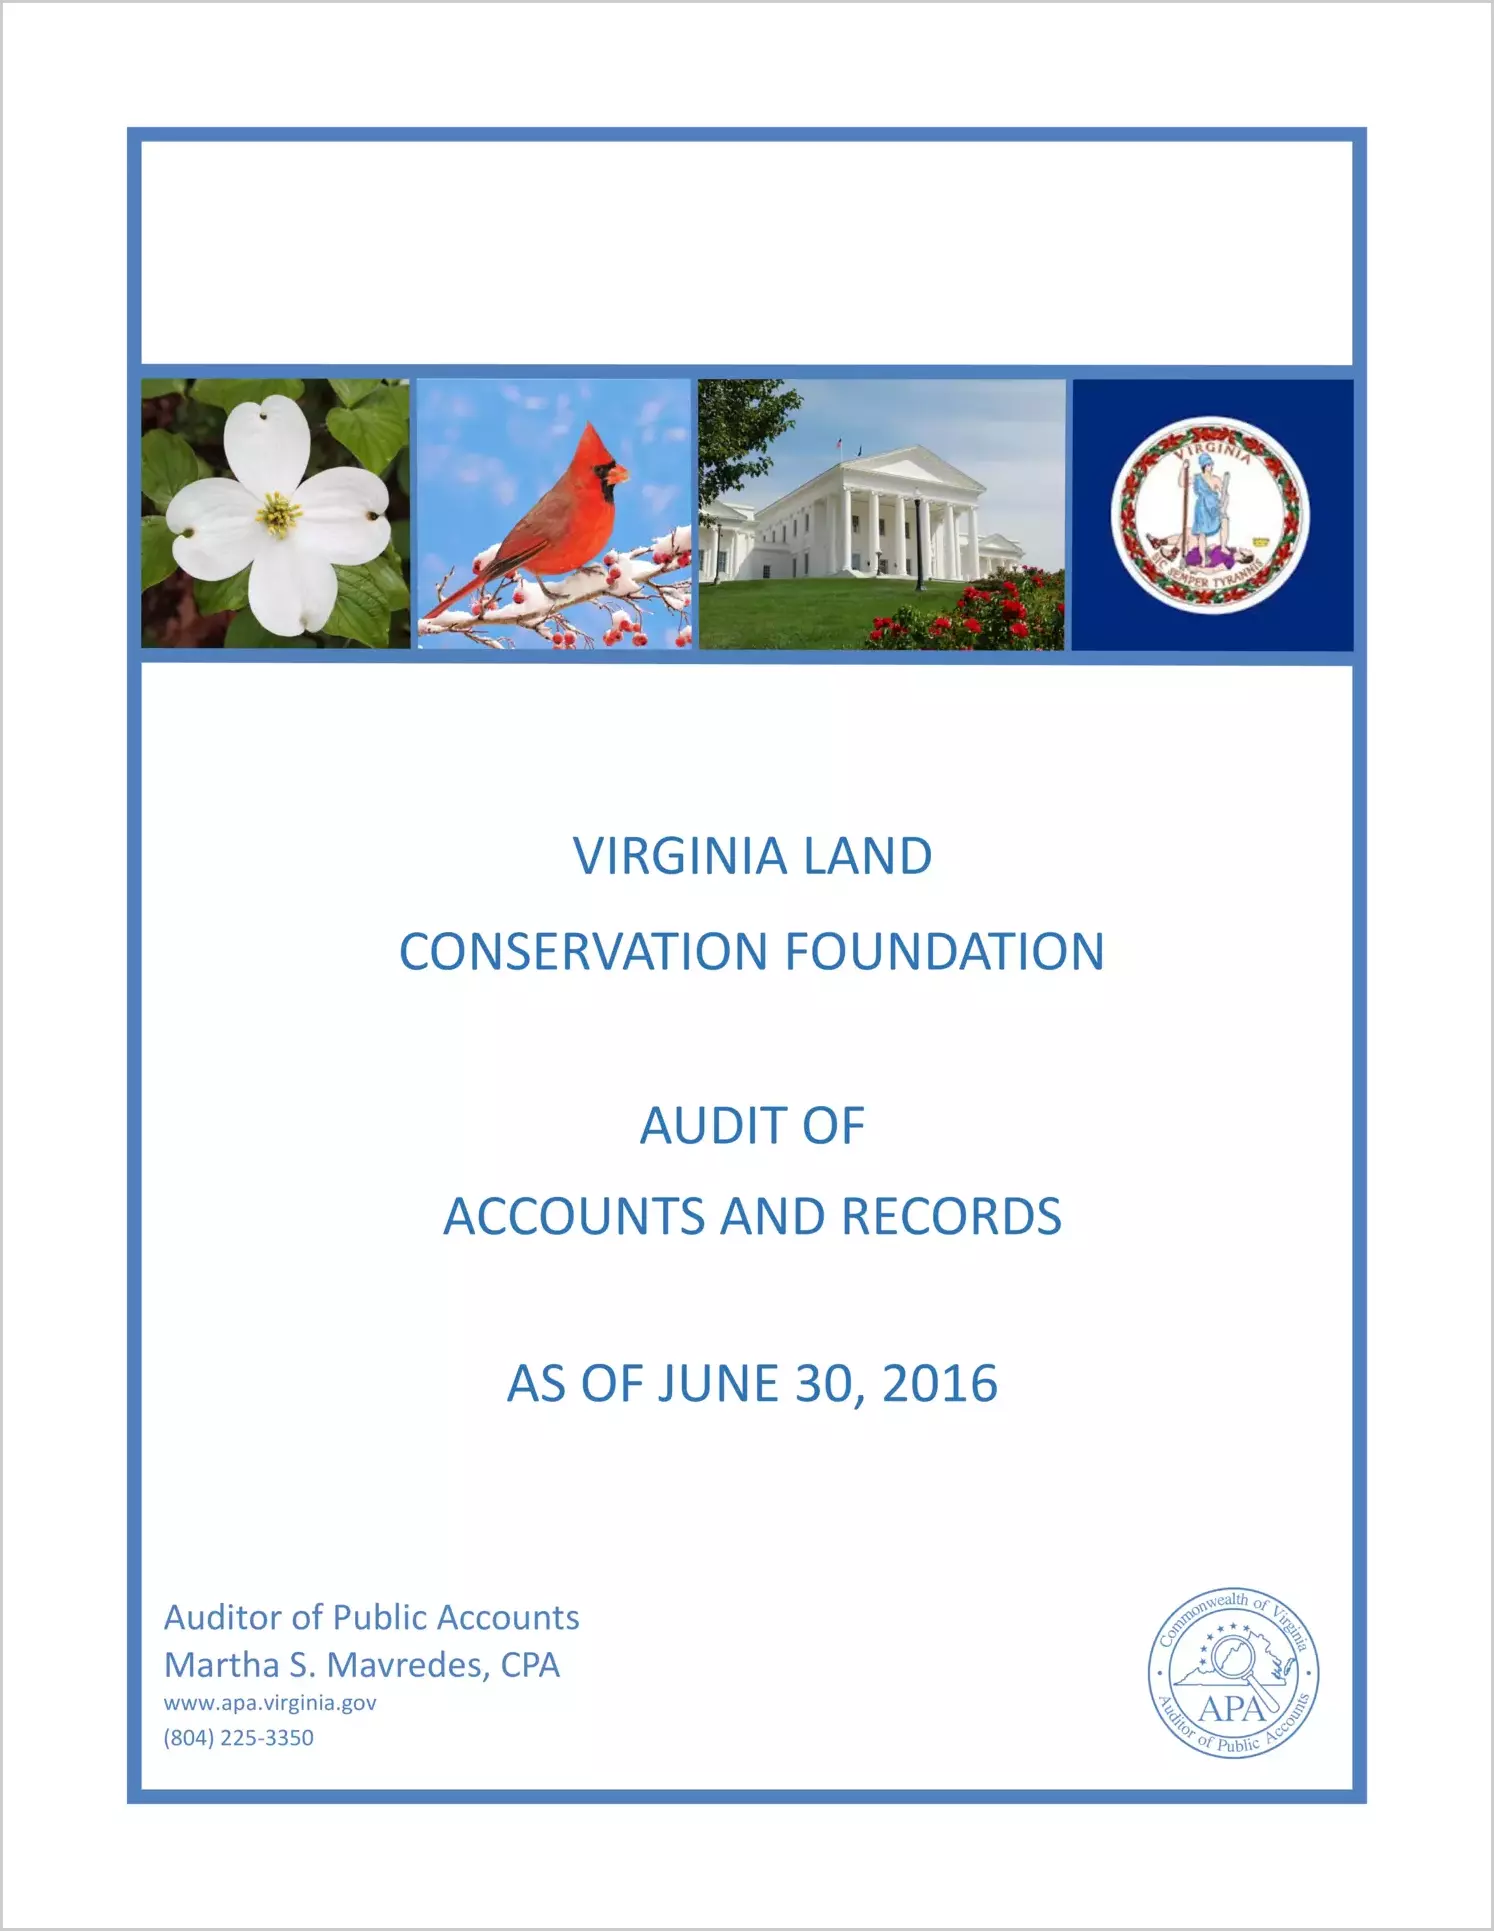 Virginia Land Conservation Foundation Audit of Accounts and Records As Of June 30, 2016